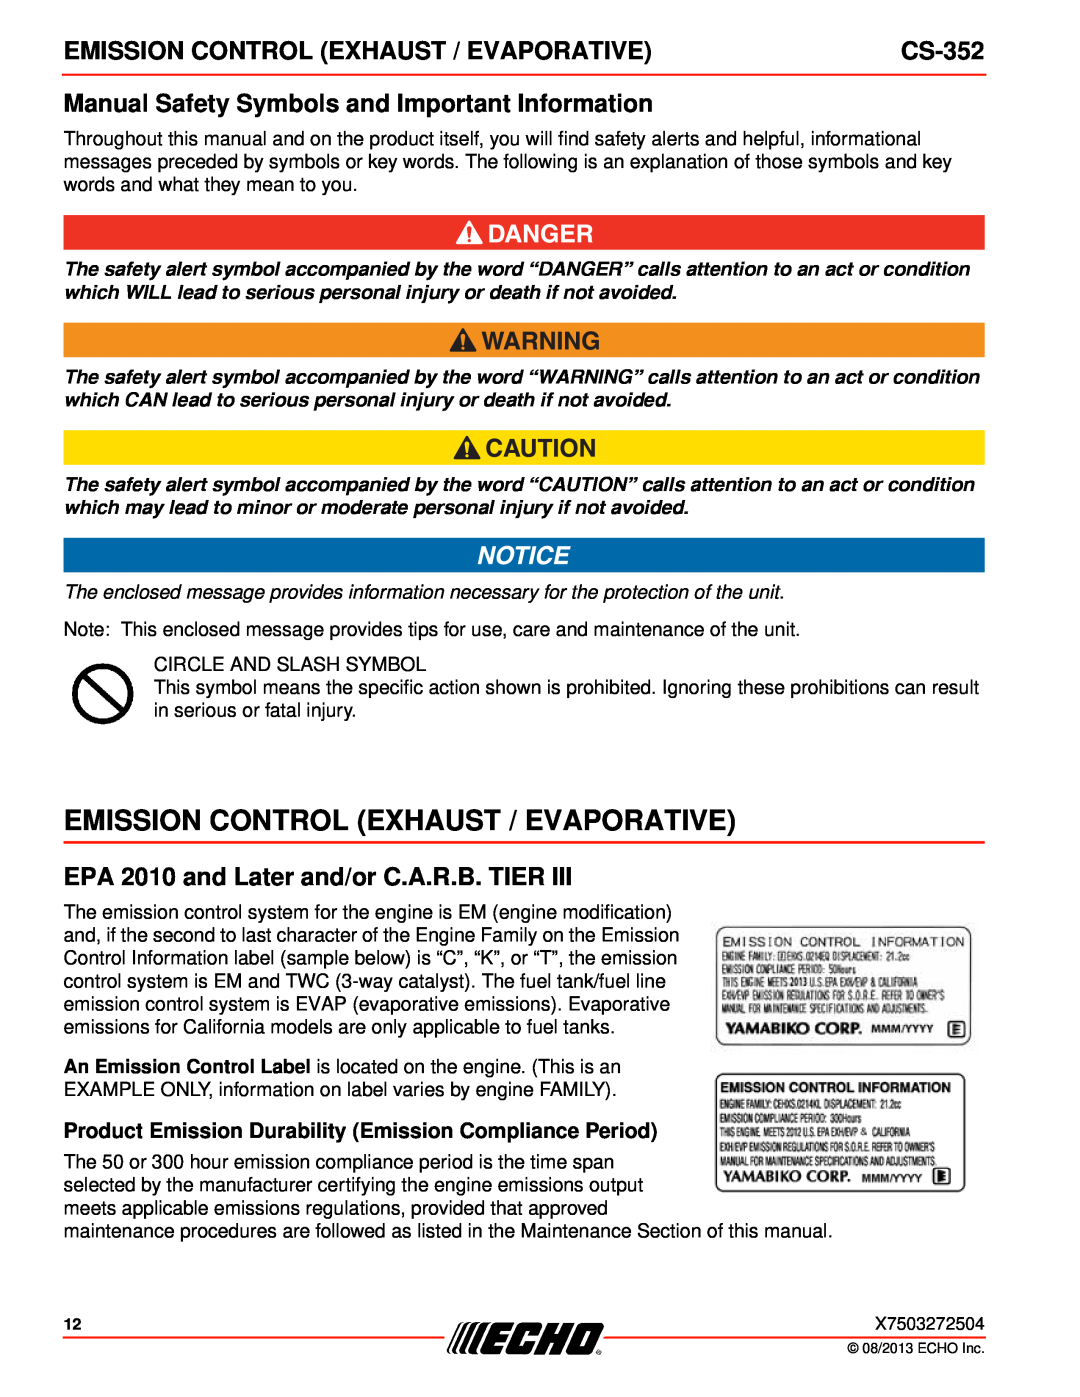 Echo CS-352 instruction manual Emission Control Exhaust / Evaporative, Manual Safety Symbols and Important Information 